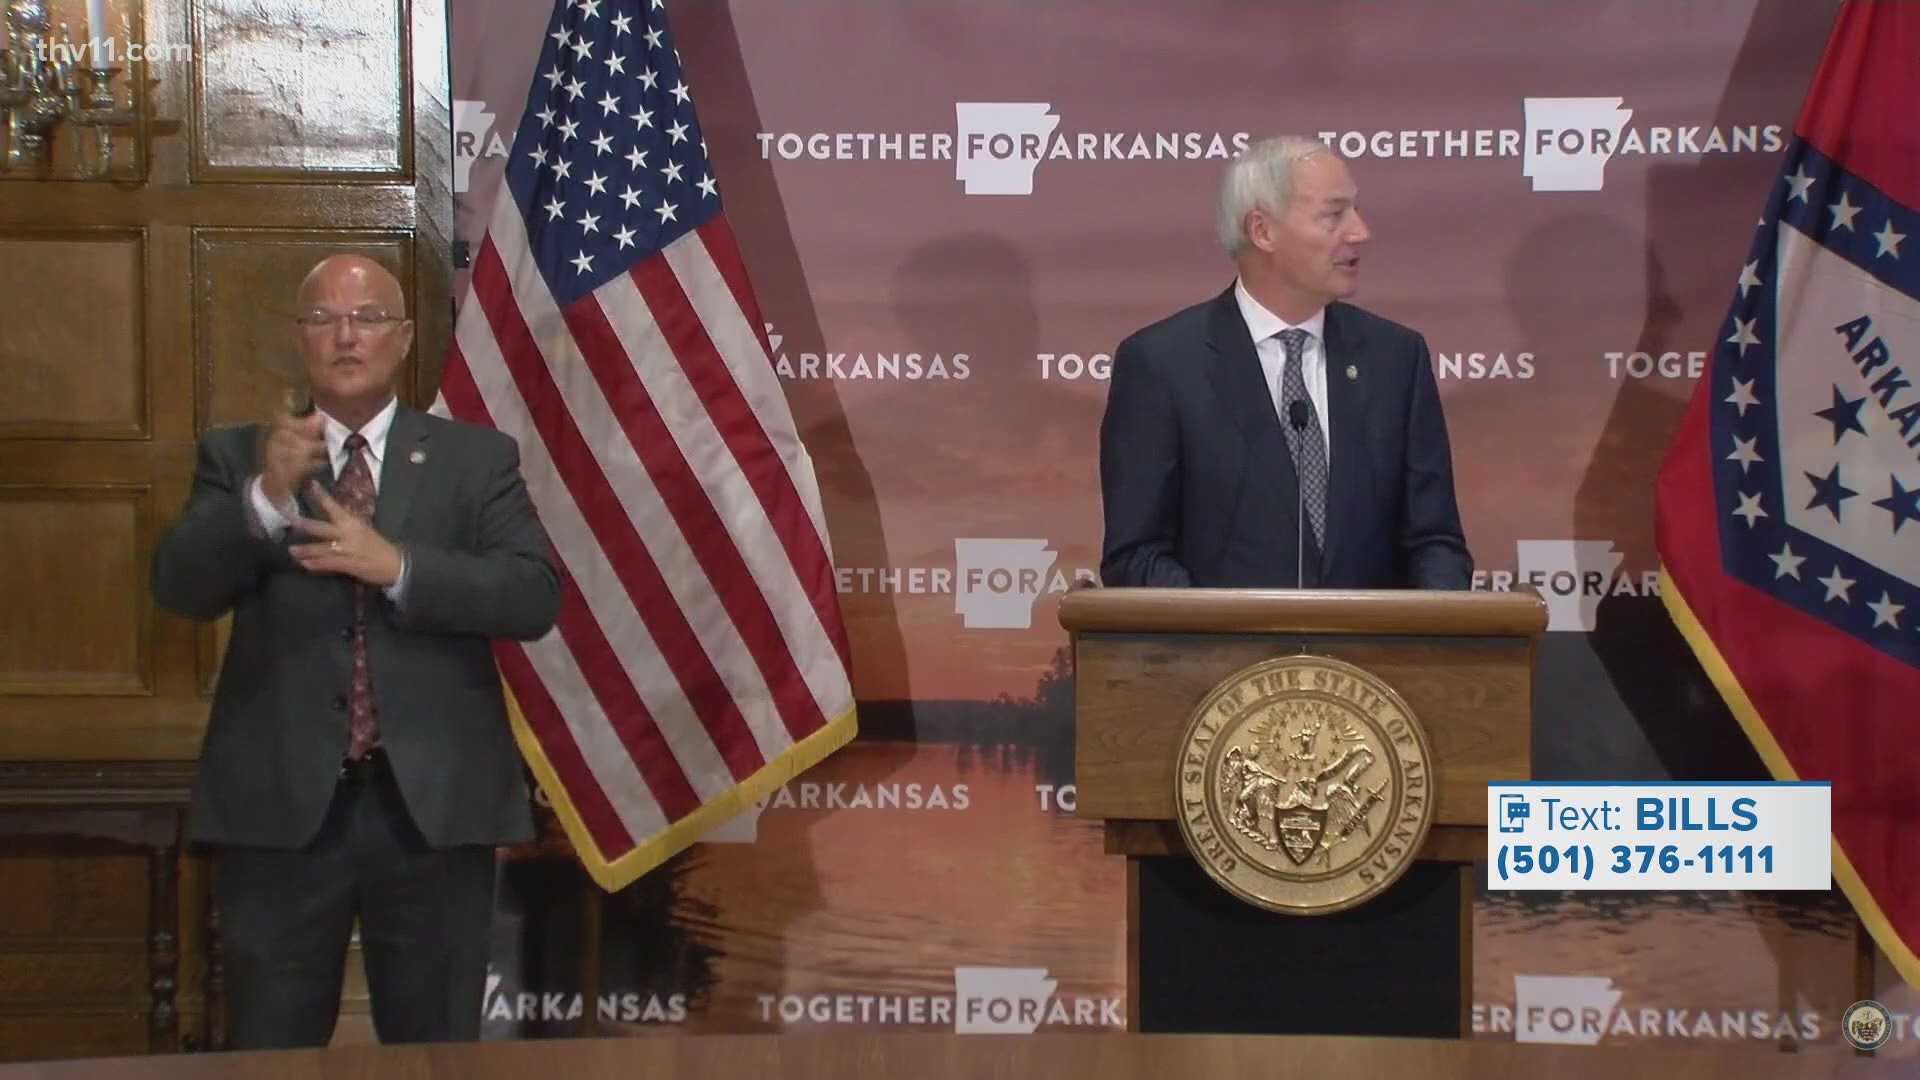 Arkansas will receive an $8.2 million in coronavirus relief funding that will go toward enhancing the LIHEAP program which helps residents with home energy bills.